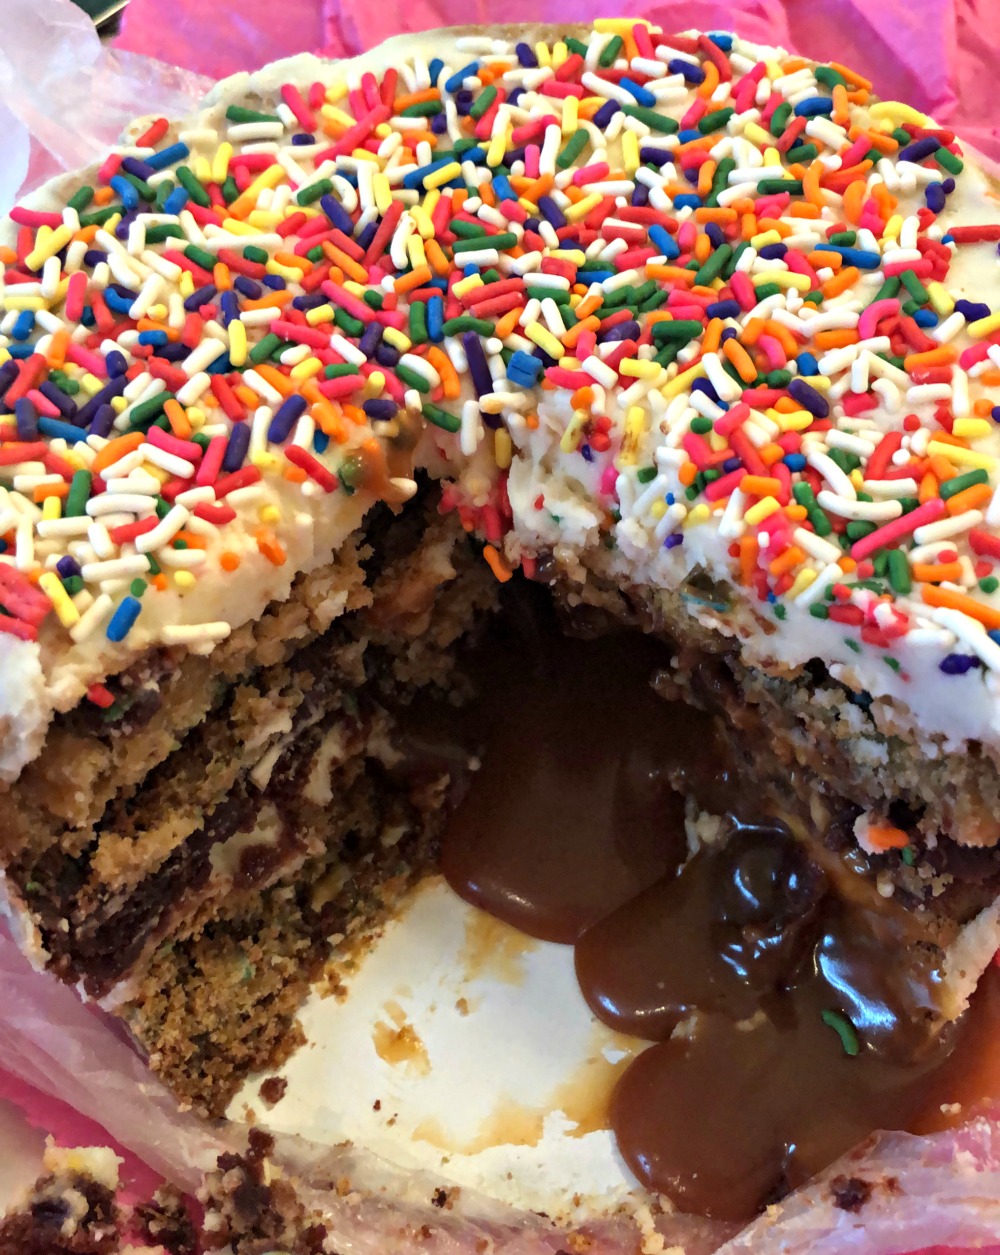 Fatty Cakes -- the absolute best dessert you've ever tried - Alyson's Current Favorites // July 2018 featured by popular Florida lifestyle blogger The Modern Savvy